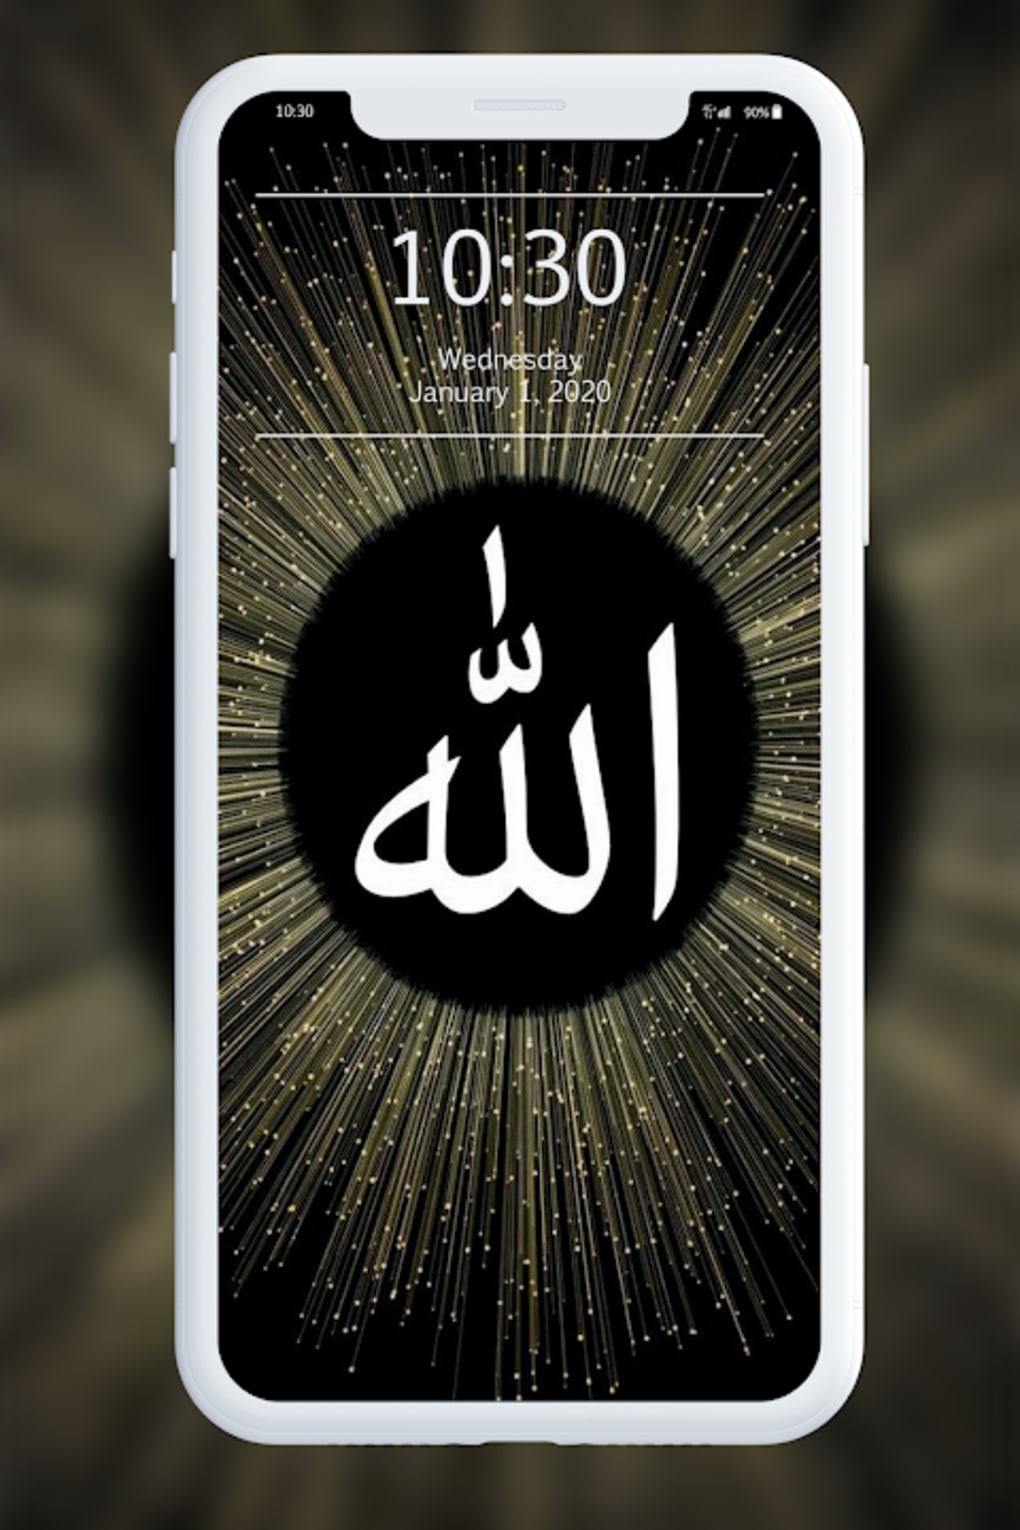 303 Allah Wallpaper Stock Video Footage  4K and HD Video Clips   Shutterstock